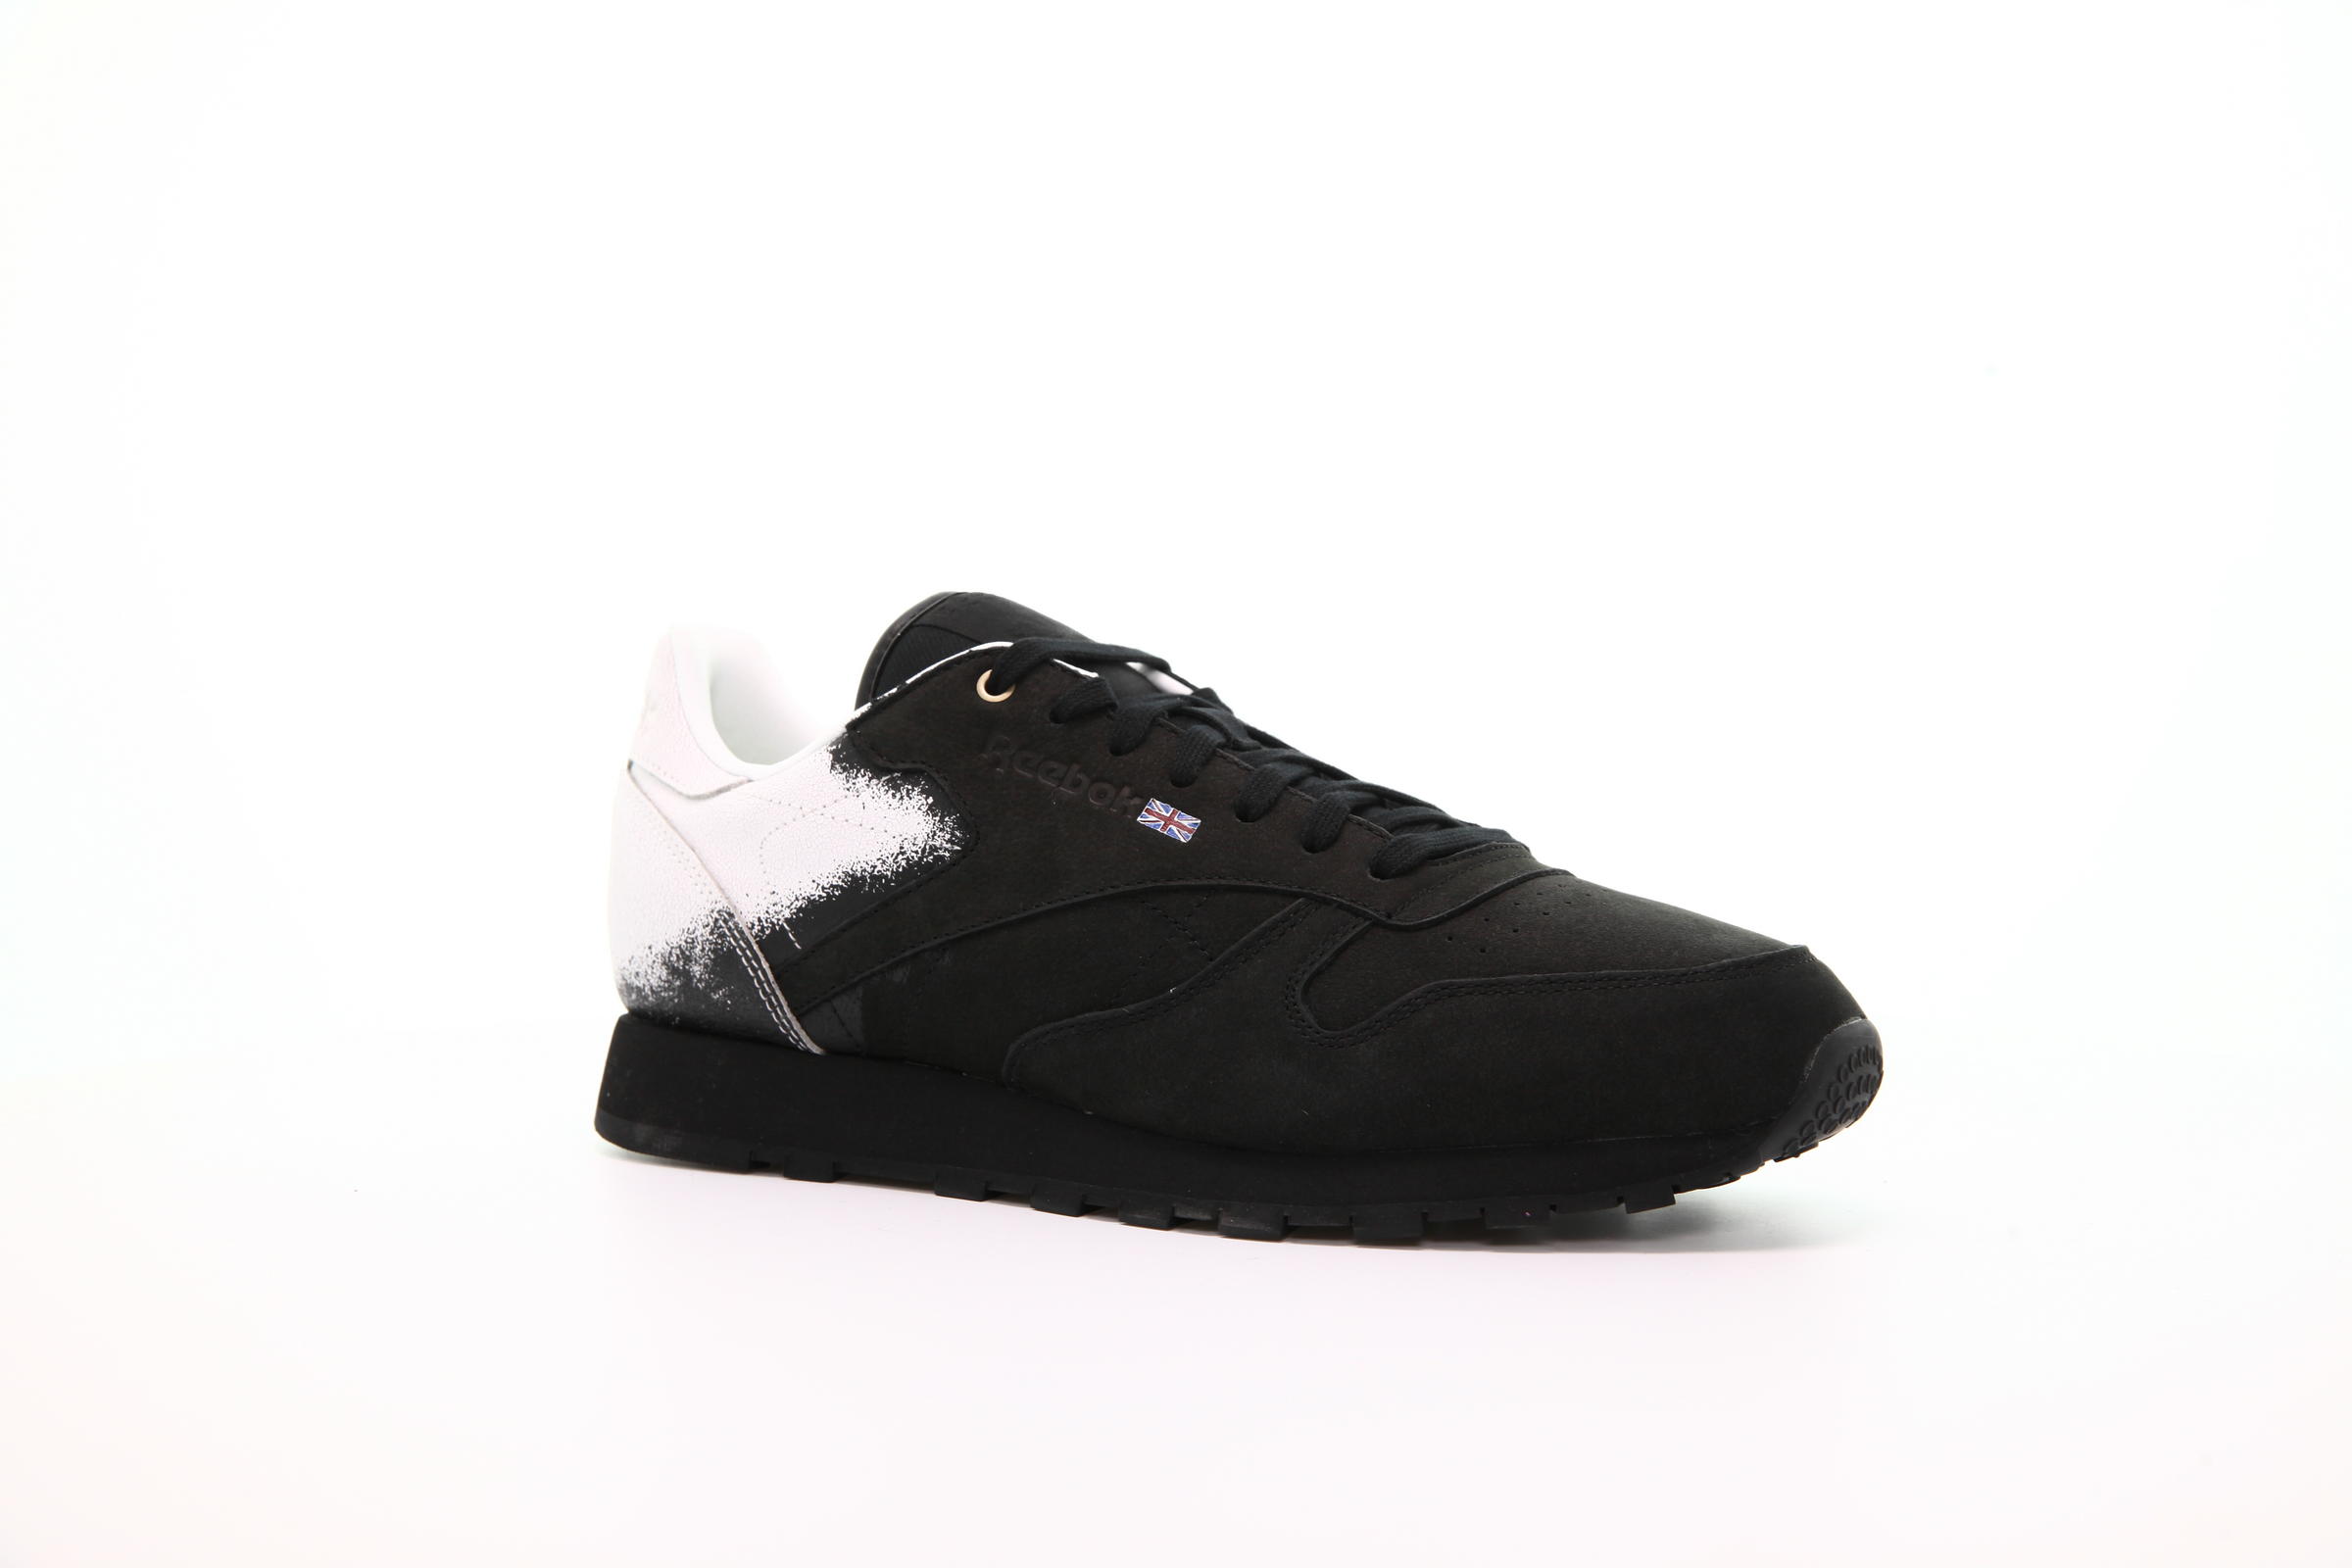 Reebok Classic Leather x Montana Cans "Black"